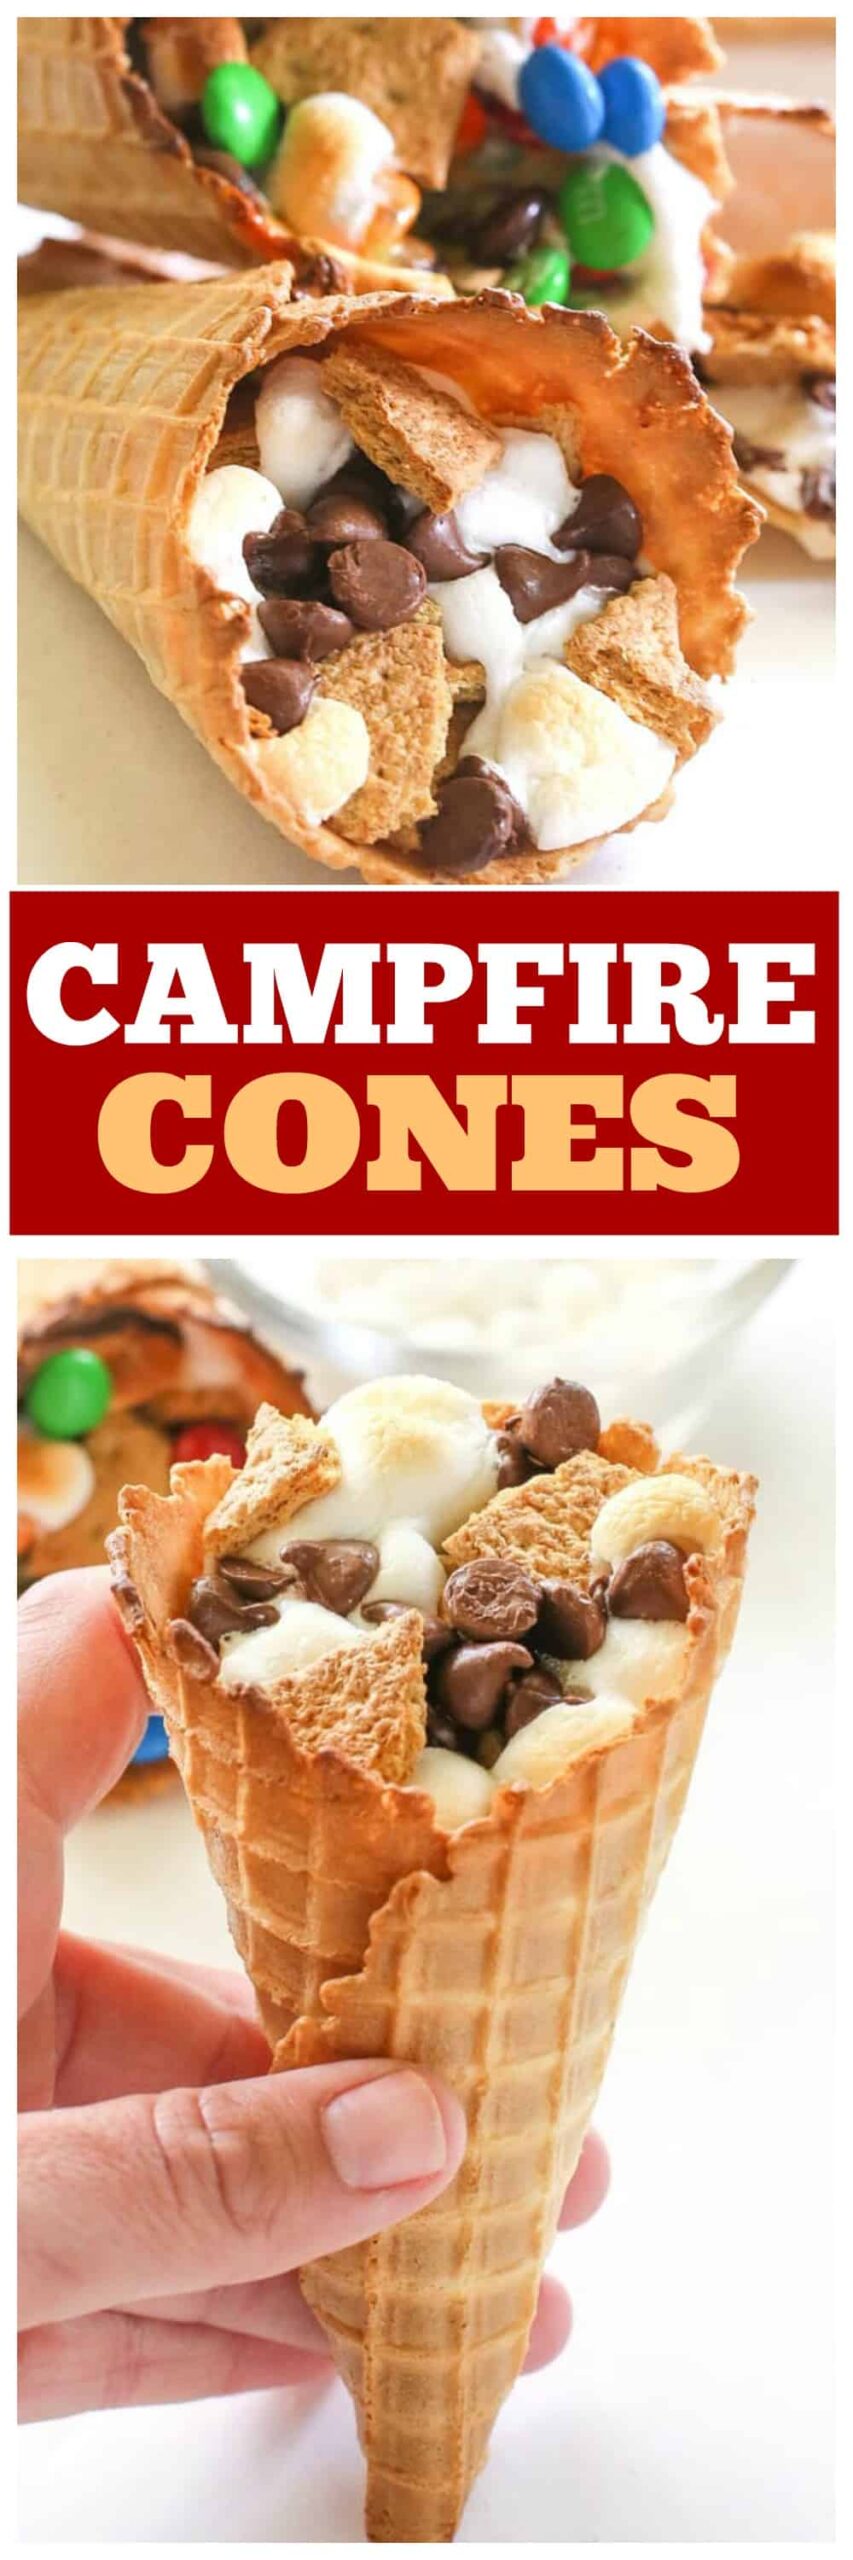 Campfire Cones - If you don't want to deal with someone poking their eye out, make your s'mores in a waffle cone, wrap it in foil, and toss it in the campfire until melted! #campfire #cones #smores #dessert